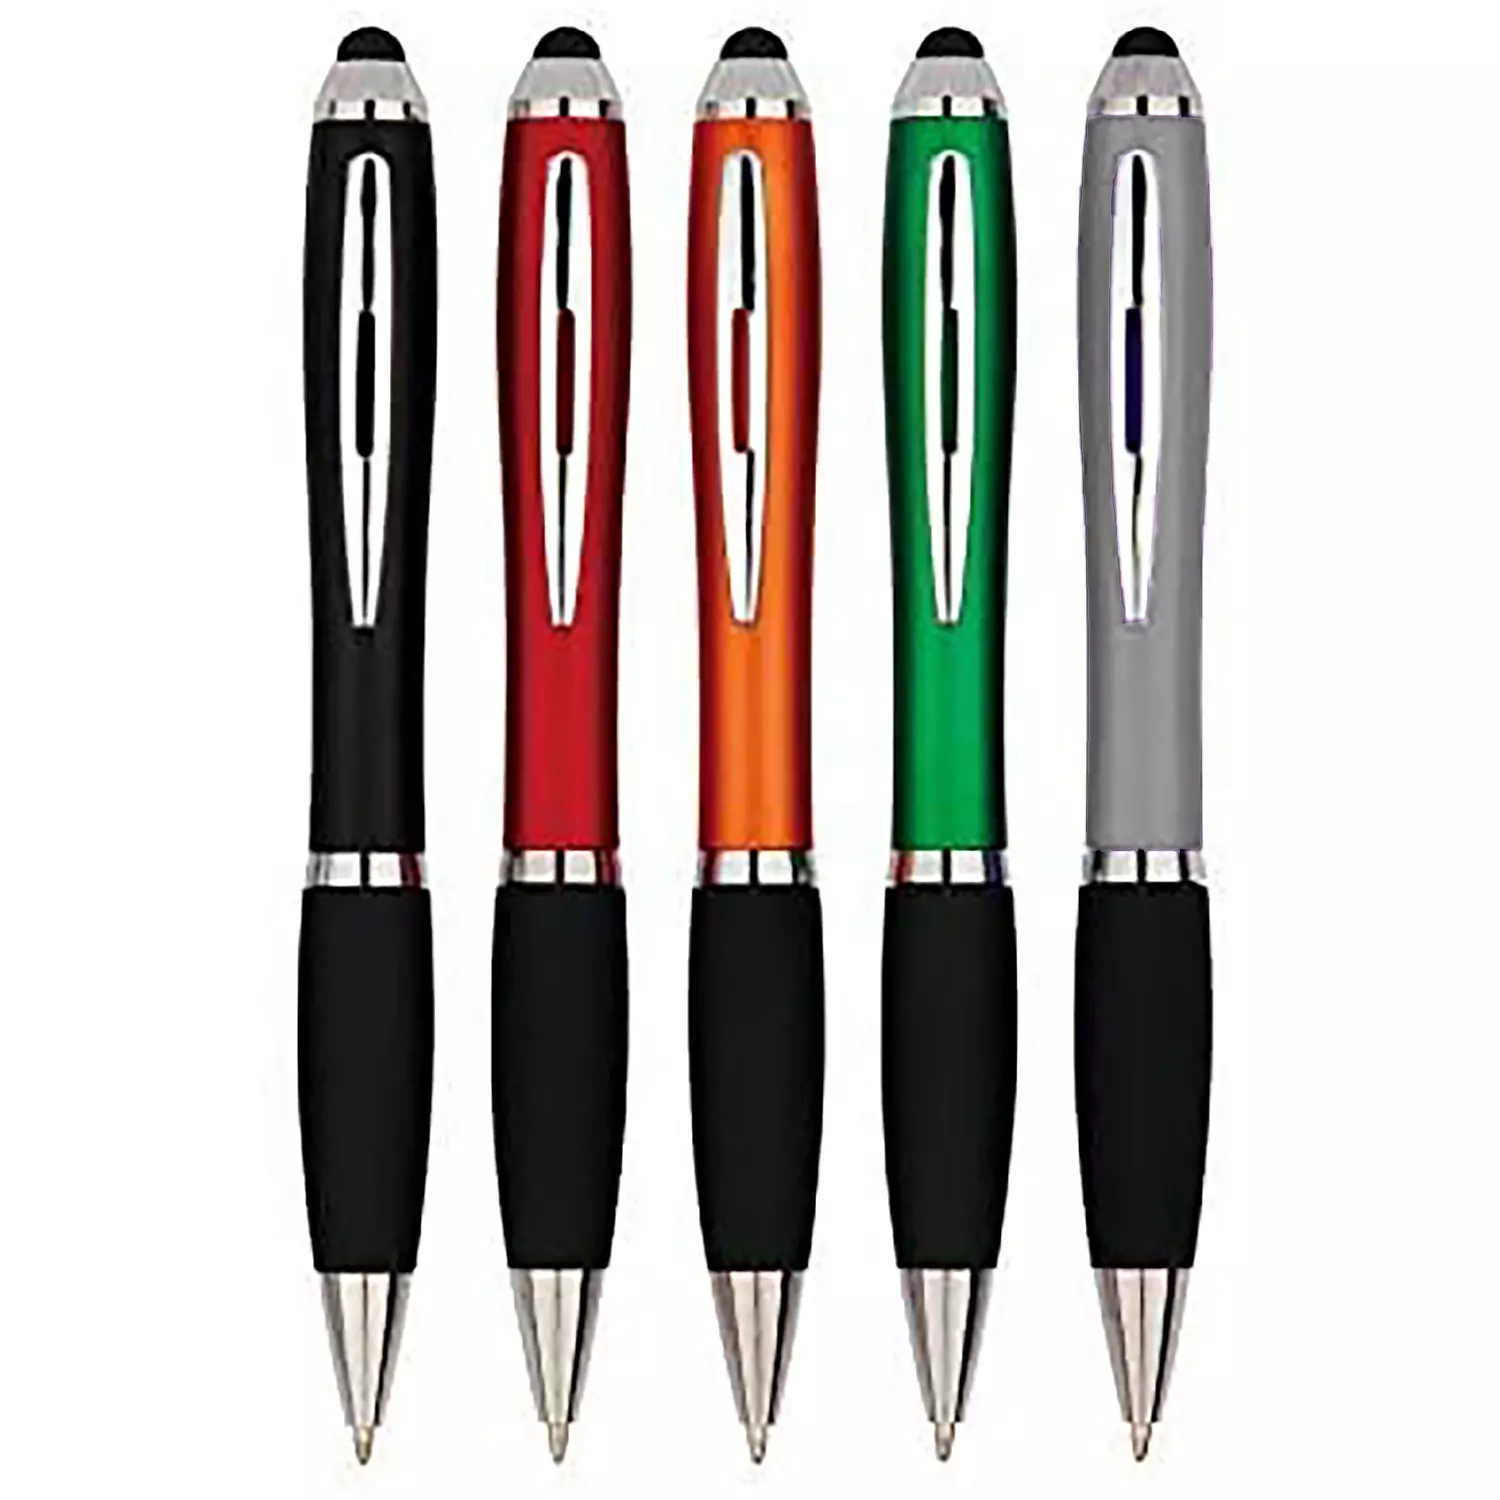 2in1 Touchscreen stylus and ballpoint pens, pk. of 5